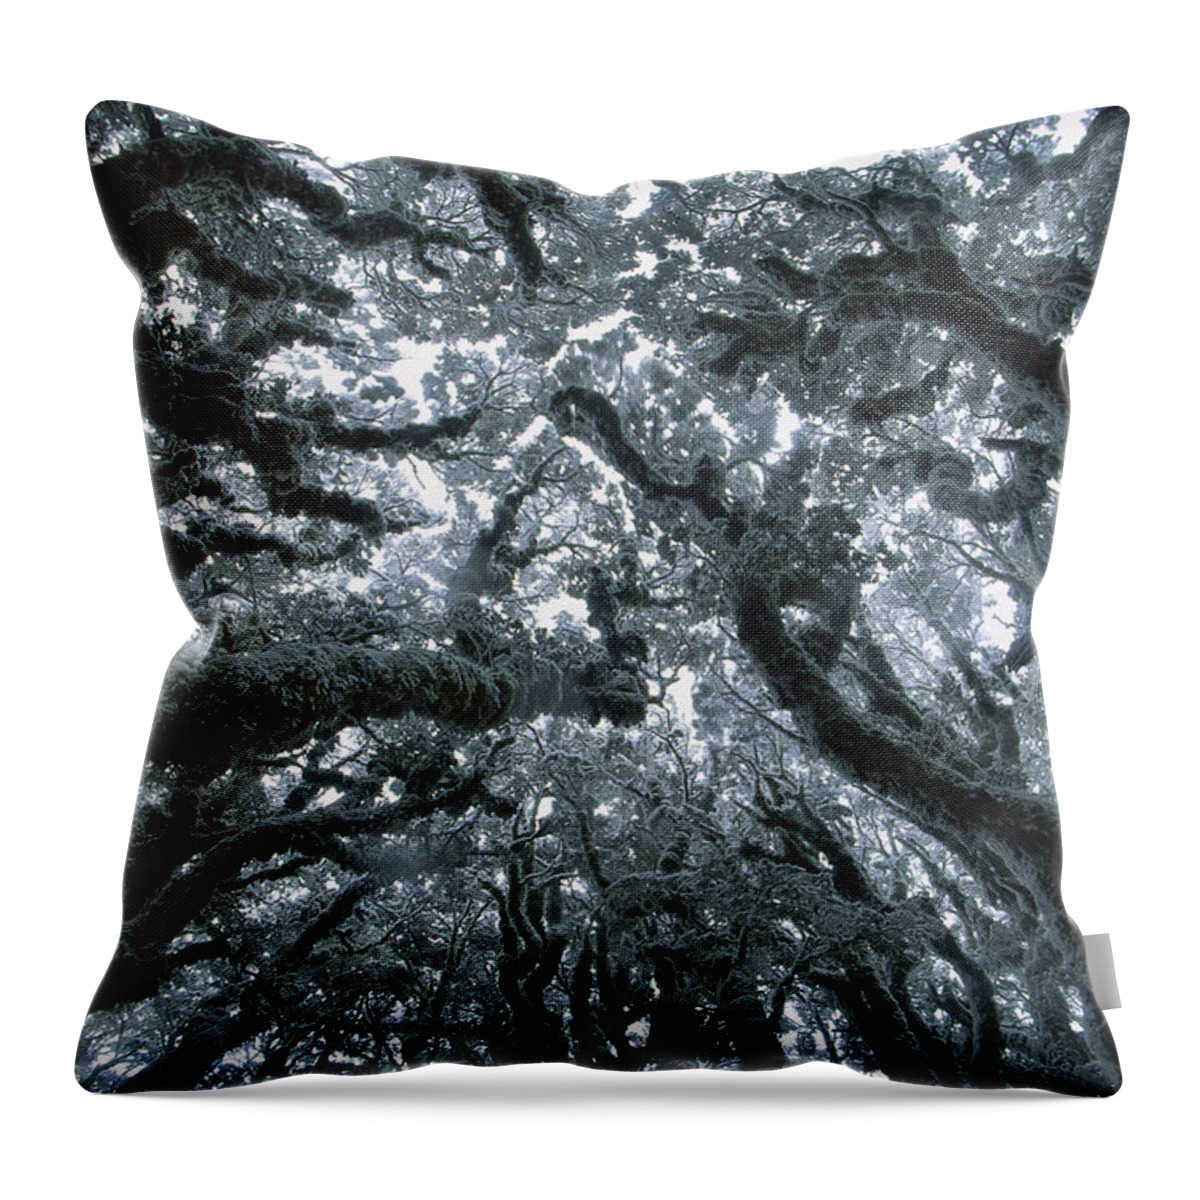 Hhh Throw Pillow featuring the photograph Autumn Snow On Beech Trees, Routeburn by Colin Monteath